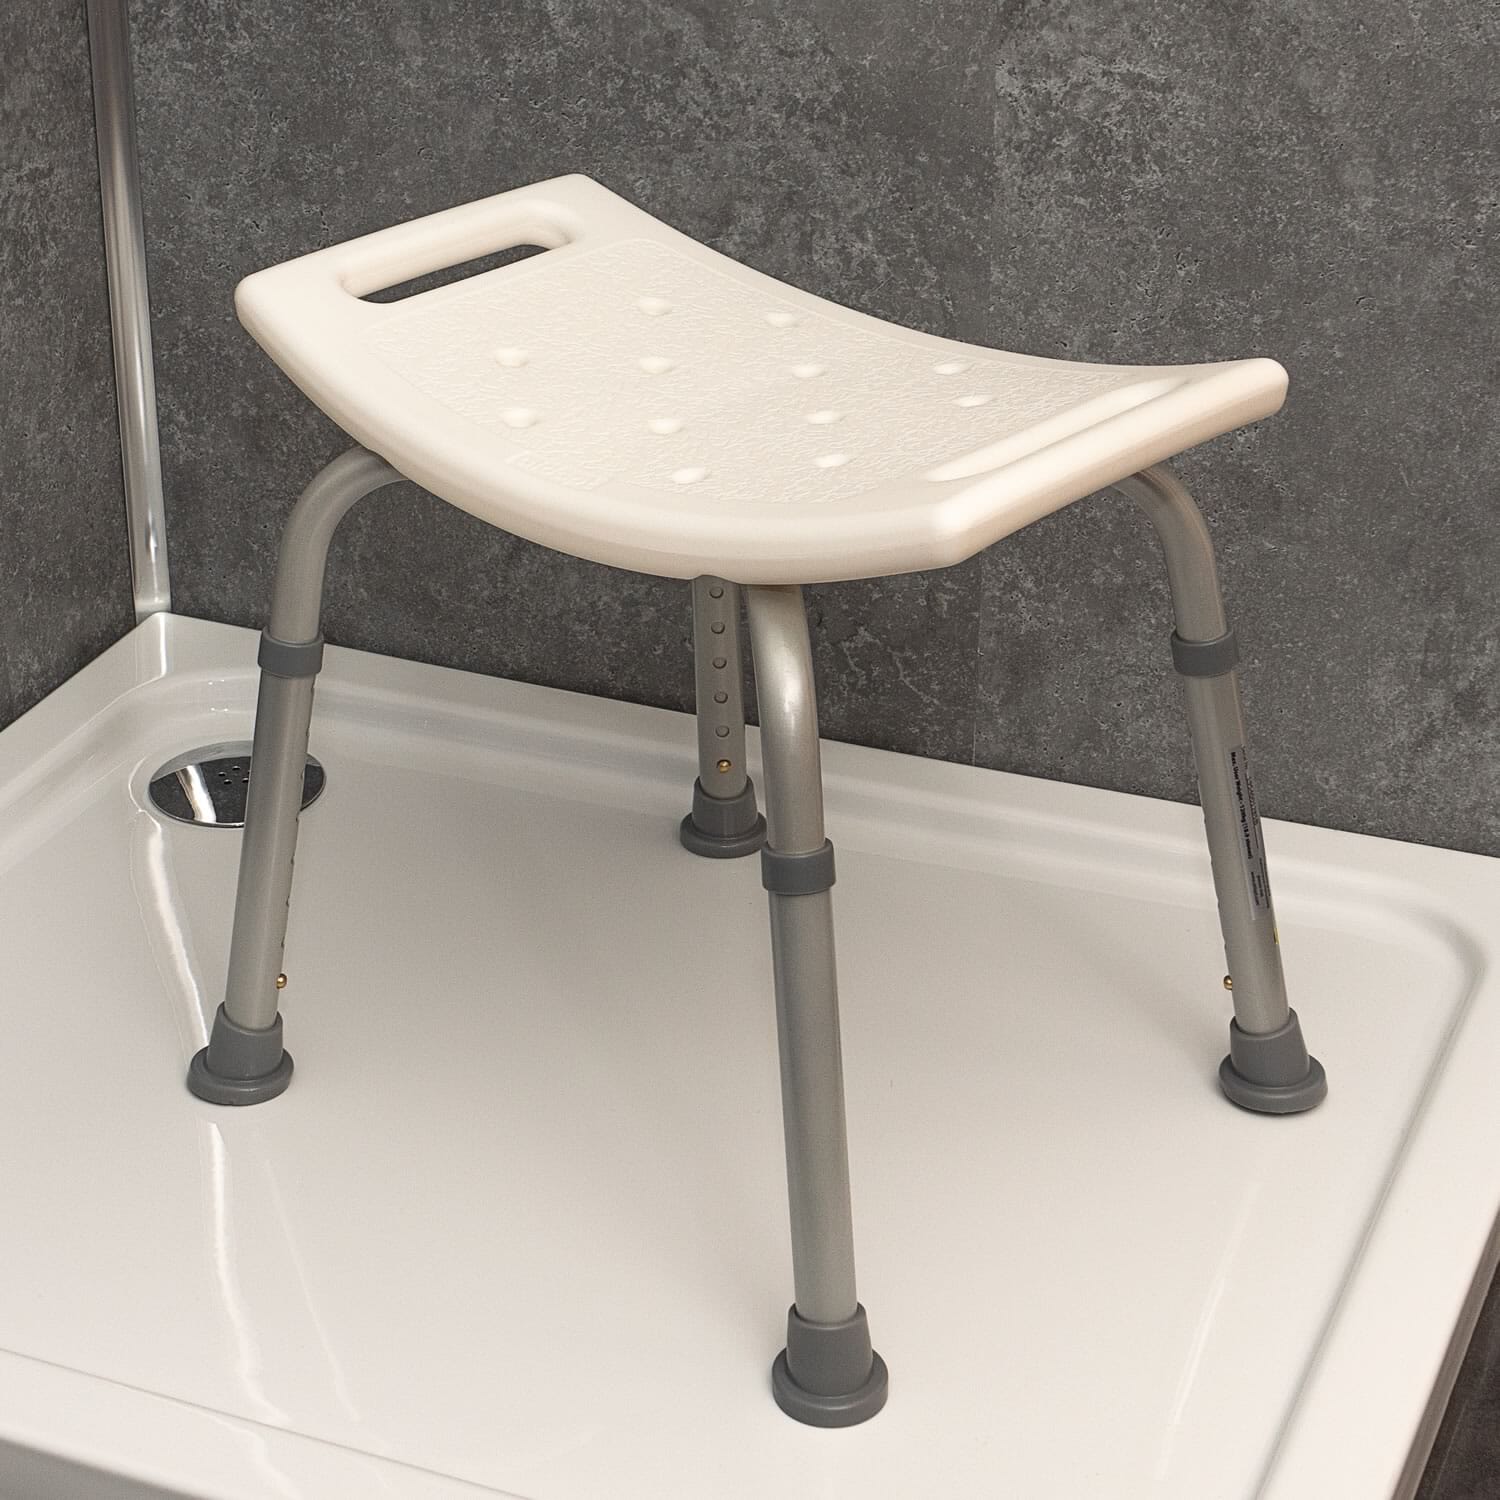 View Curved Shower Stool information